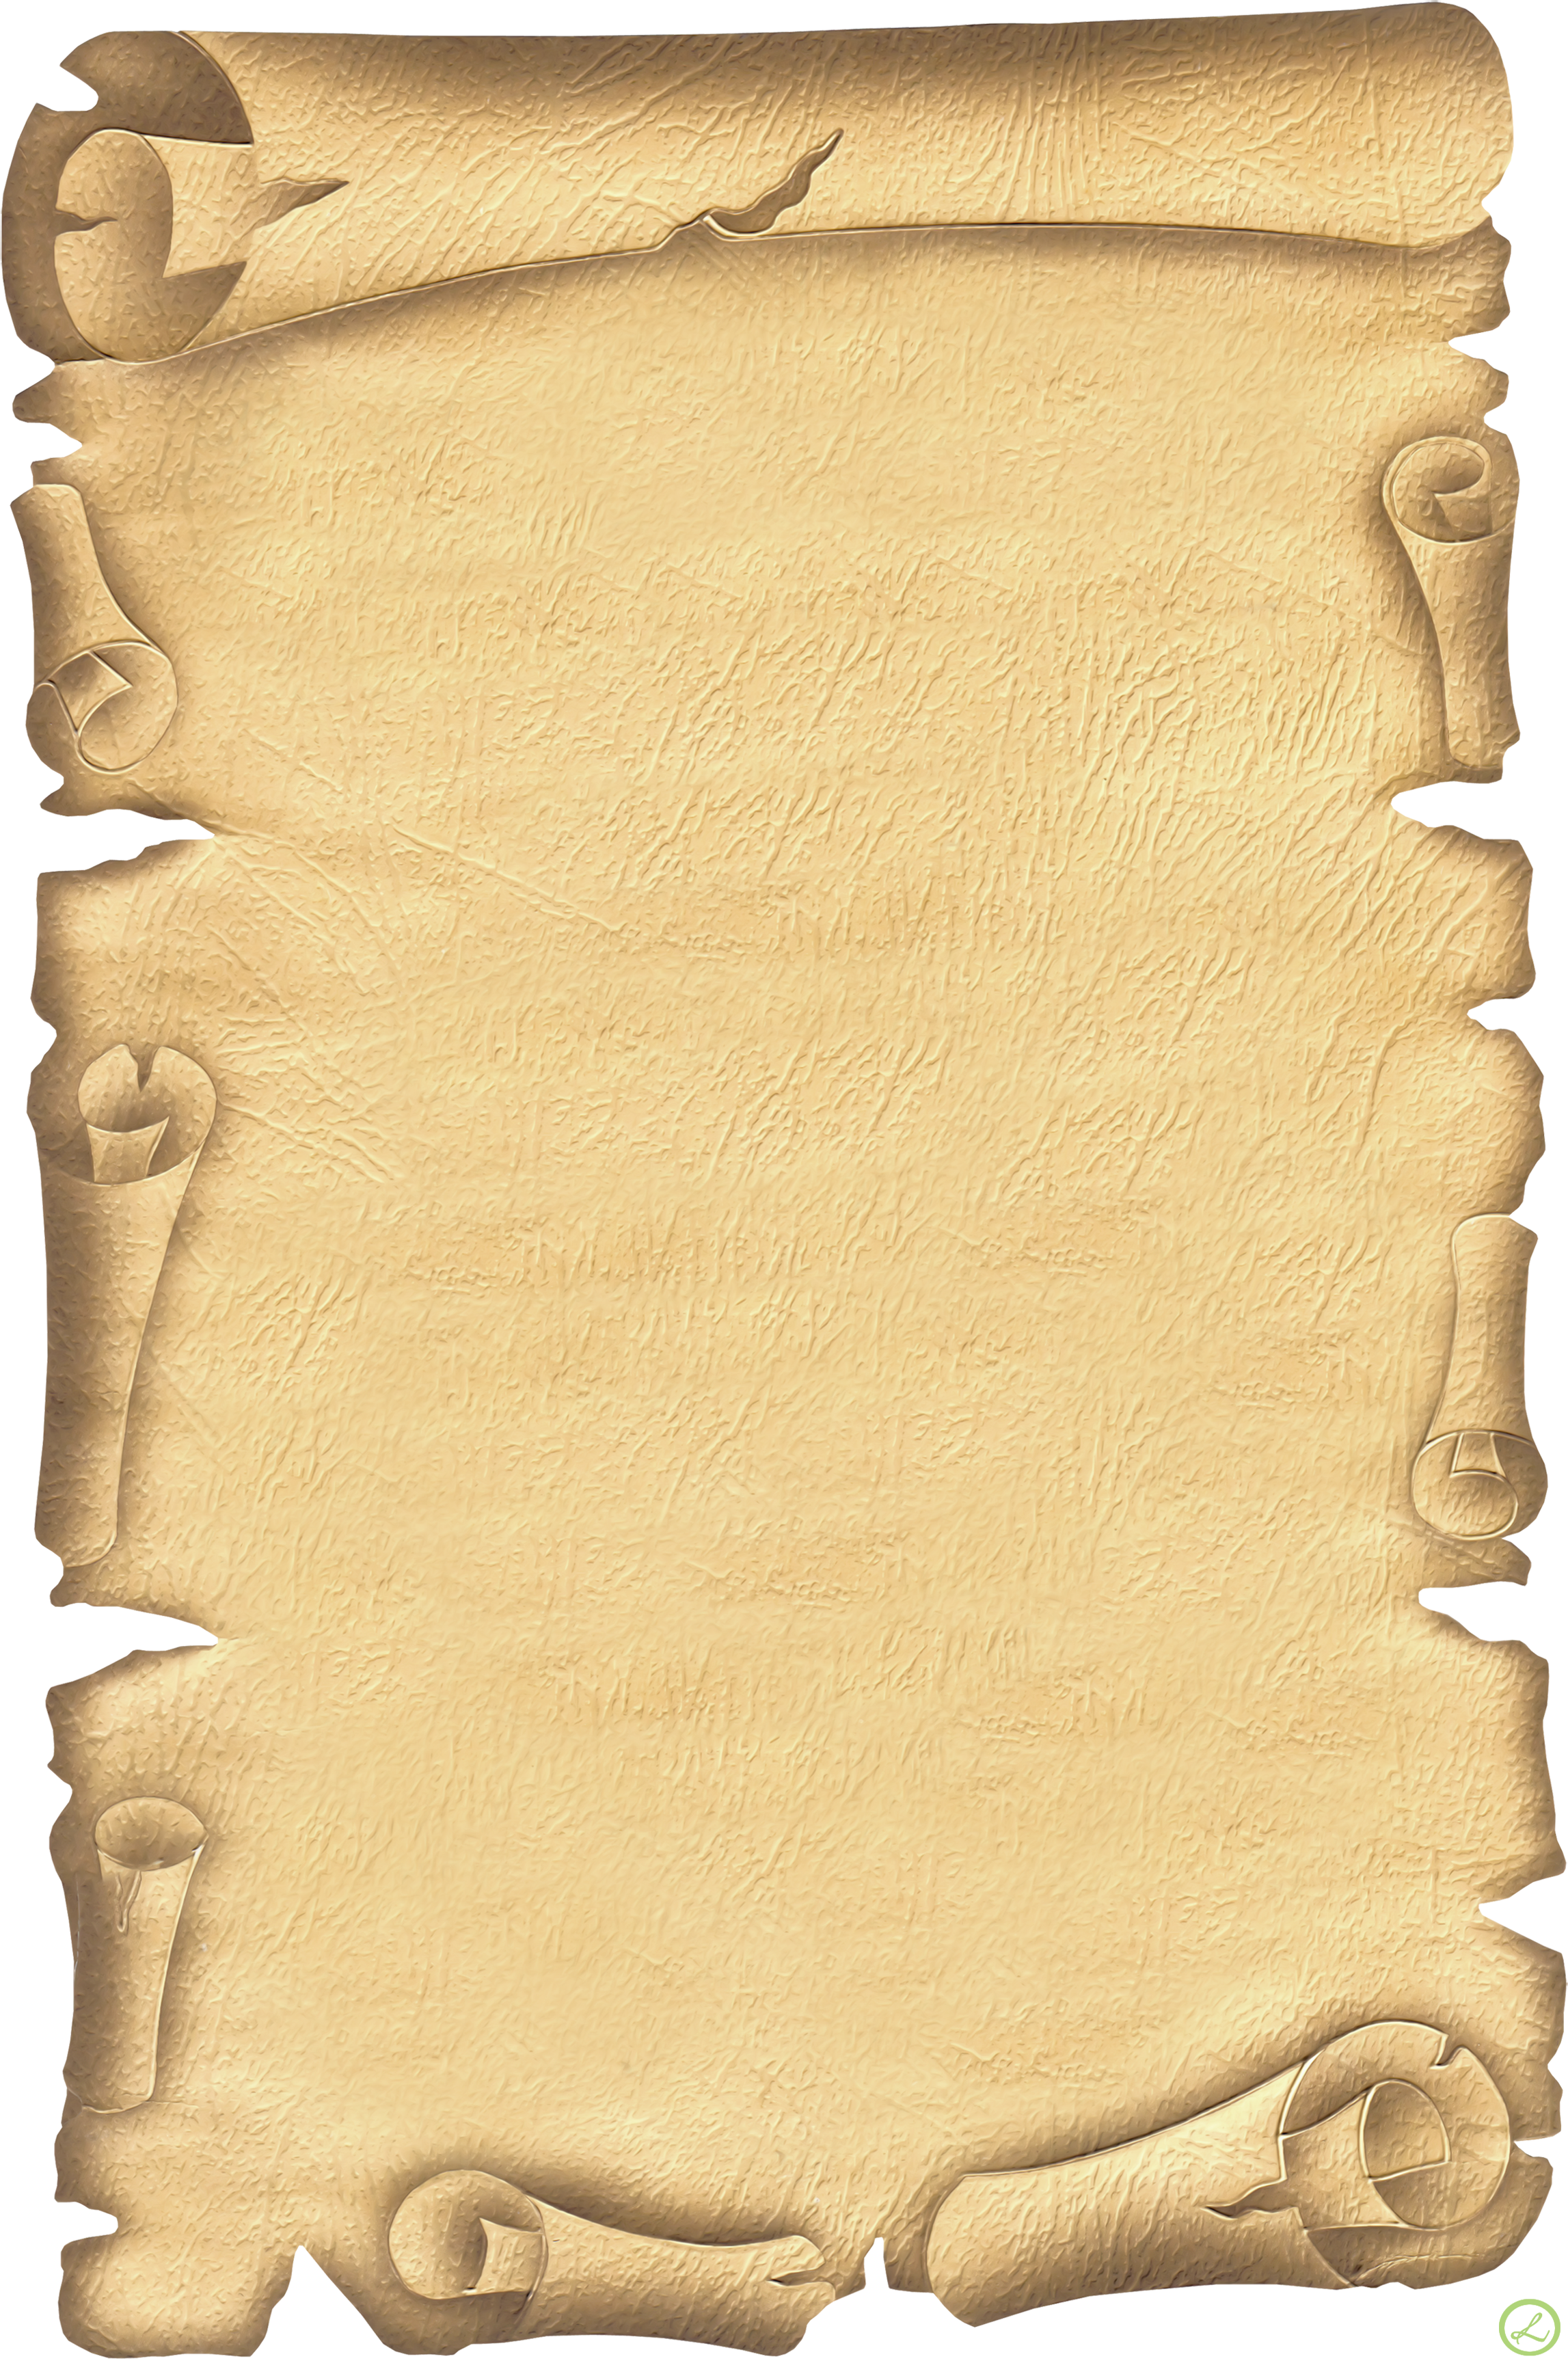 A Parchment With Scrolls On It